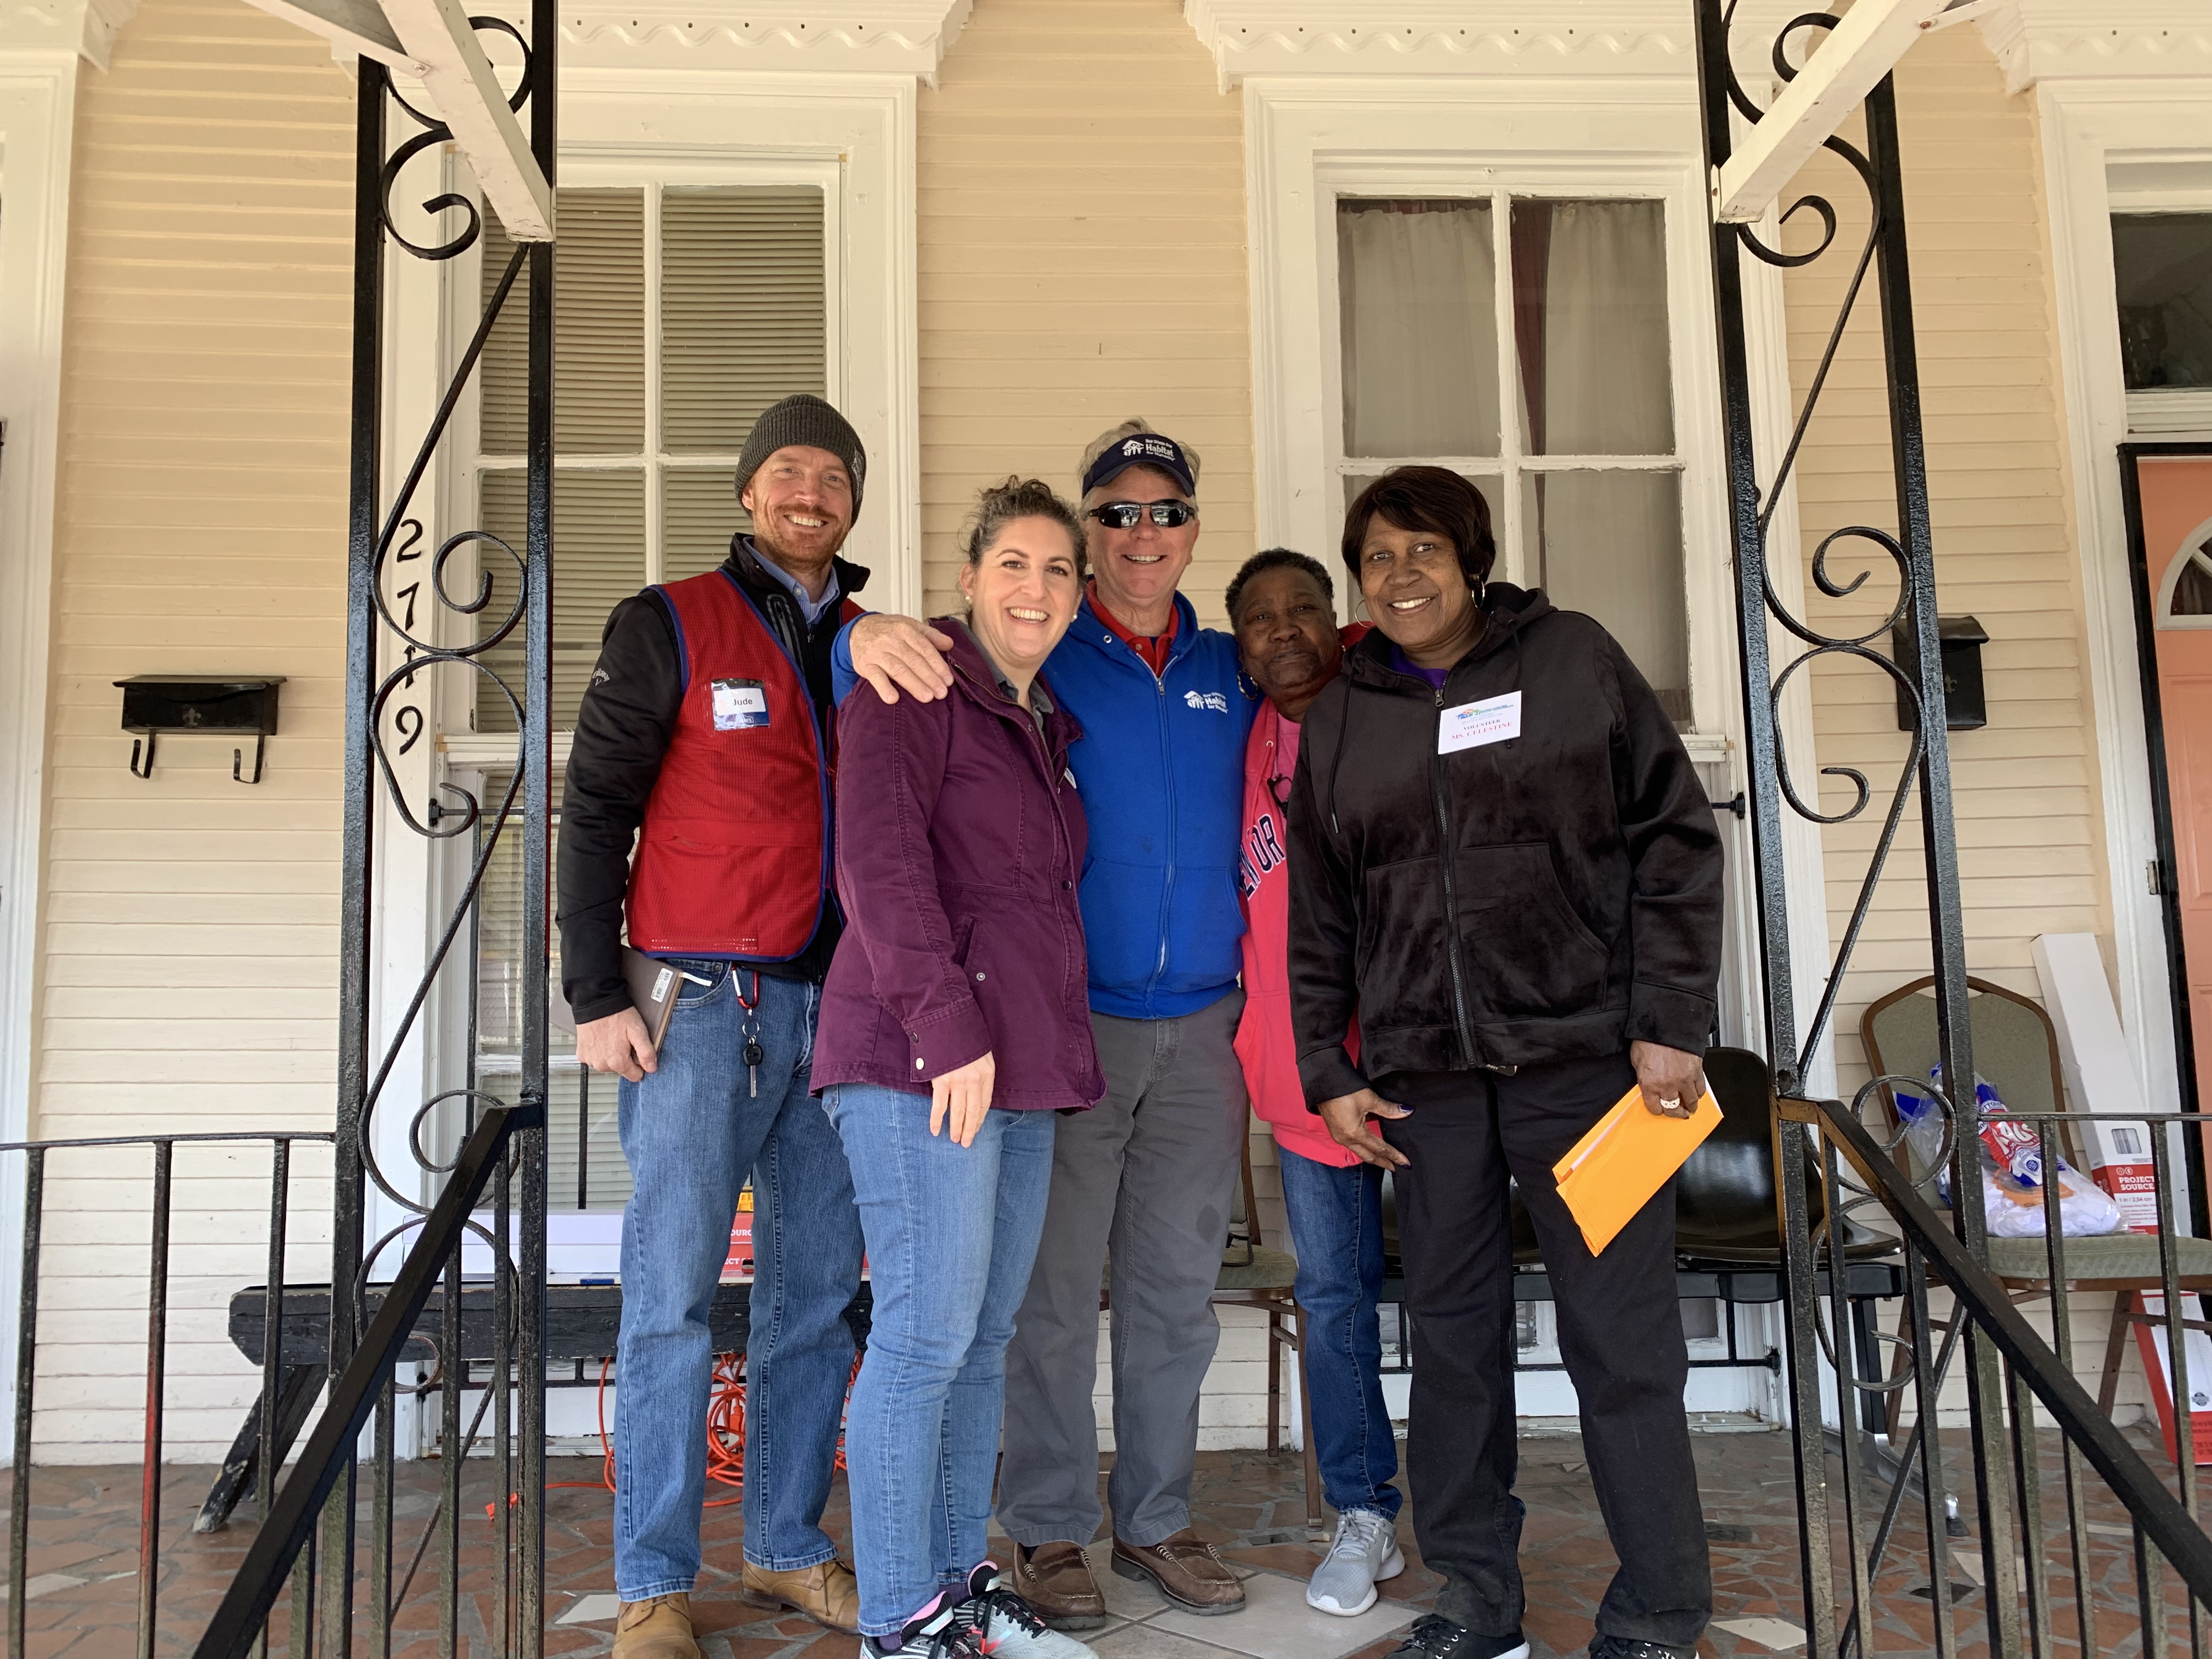 A homeowner on her porch with the home repair team and friends.